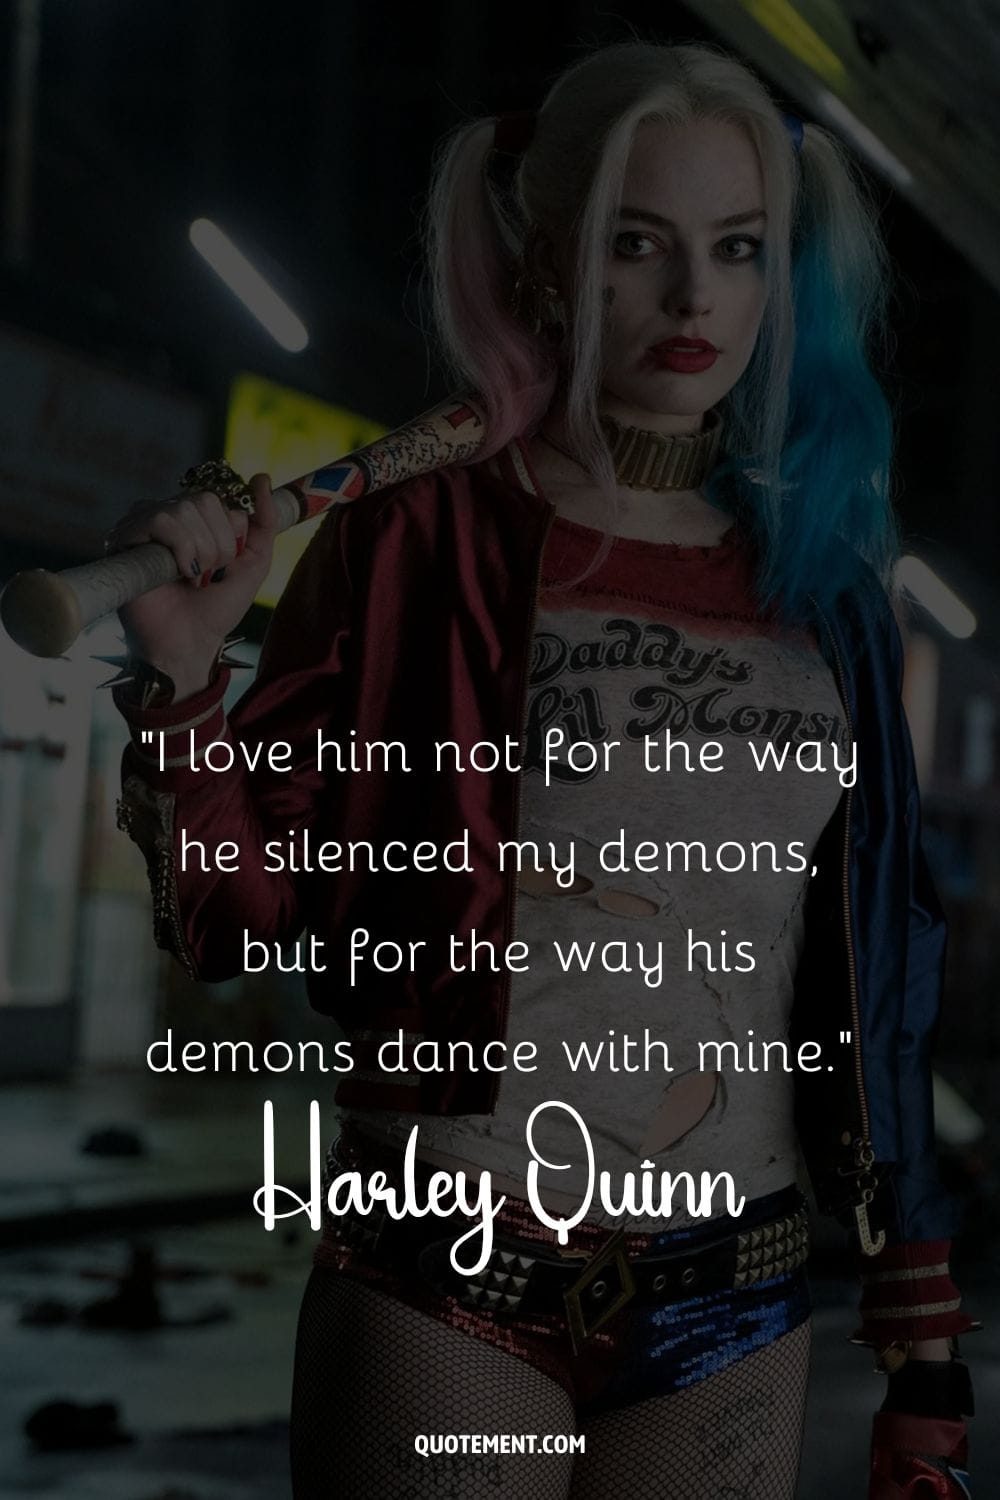 Harley Quinn image representing the best Harley Quinn quote.